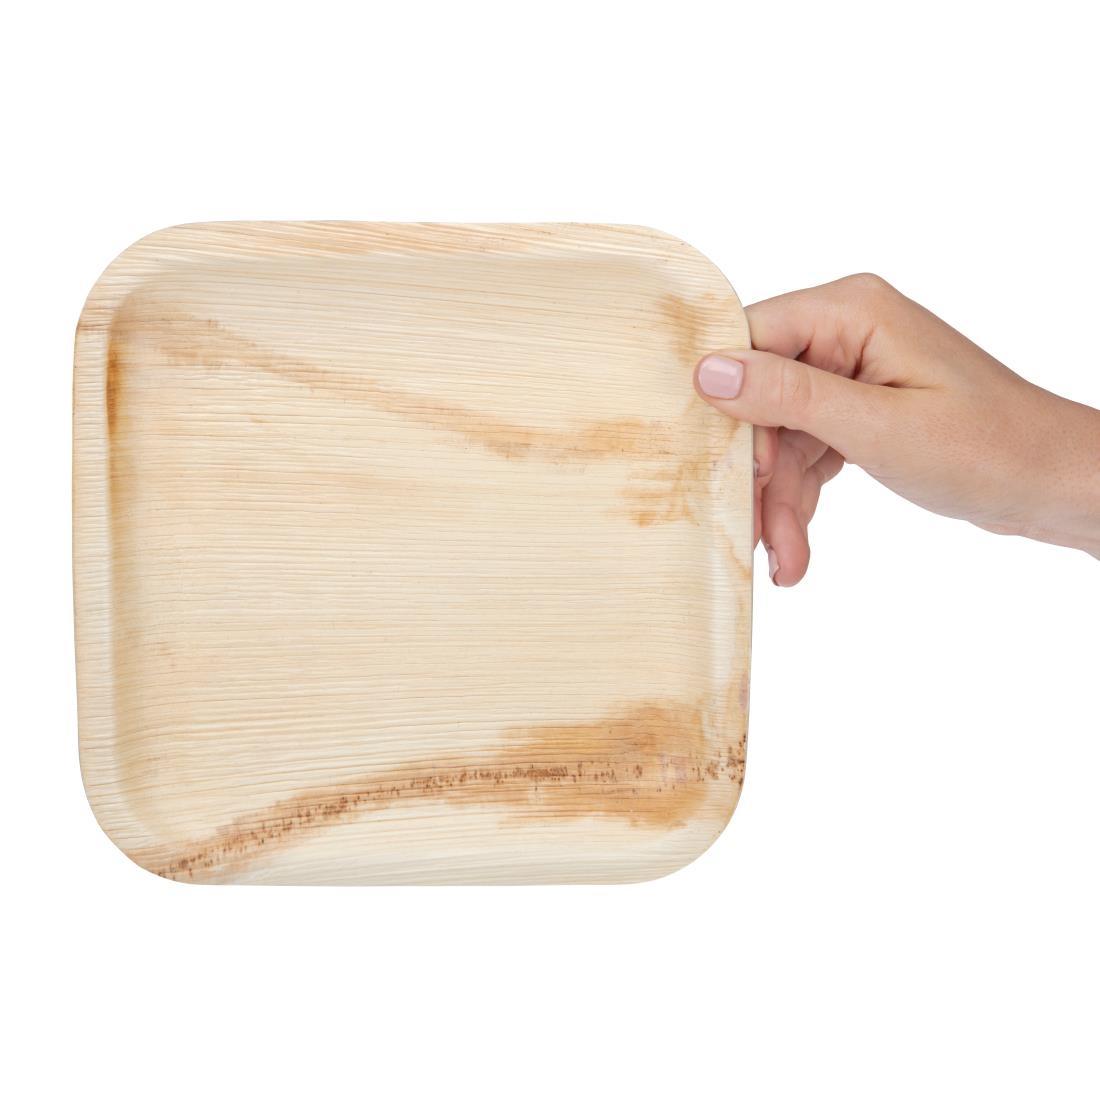 Fiesta Compostable Palm Leaf Plates Square 200mm (Pack of 100) - DK376  - 3